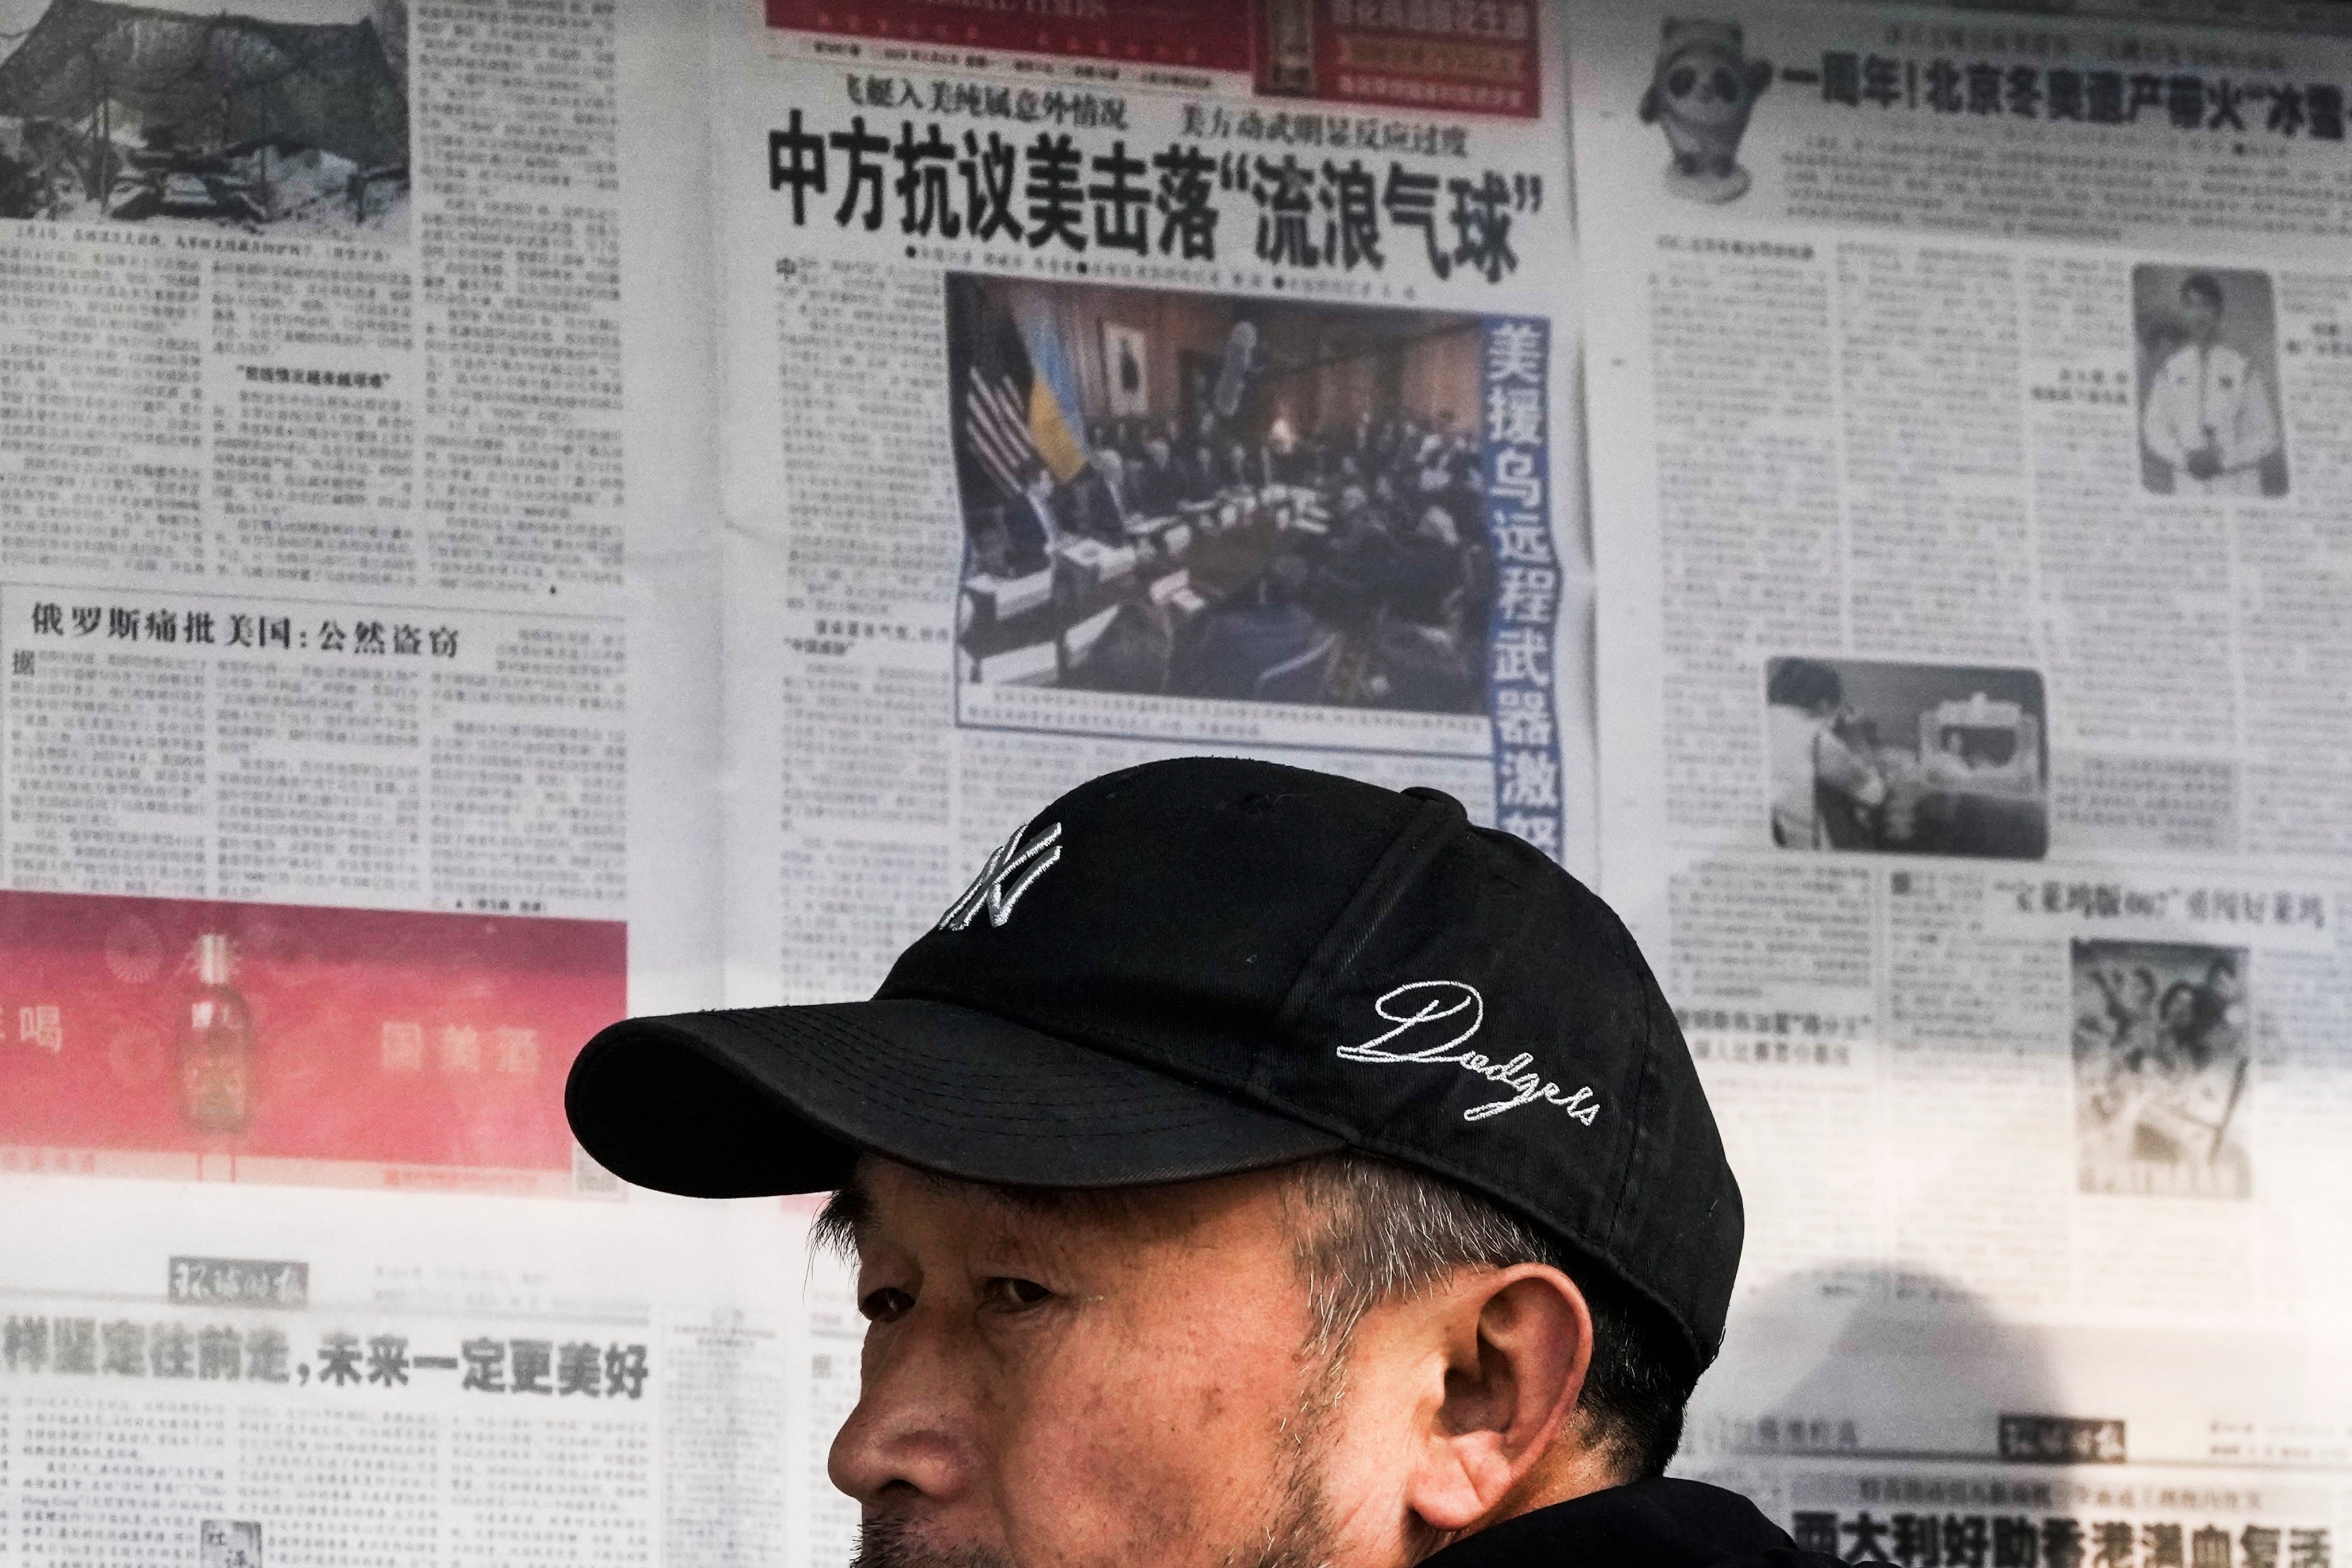 A man reacts after reading a newspaper headline reporting on the US-China balloon incident at a stand in Beijing on February 6. Photo: AP 